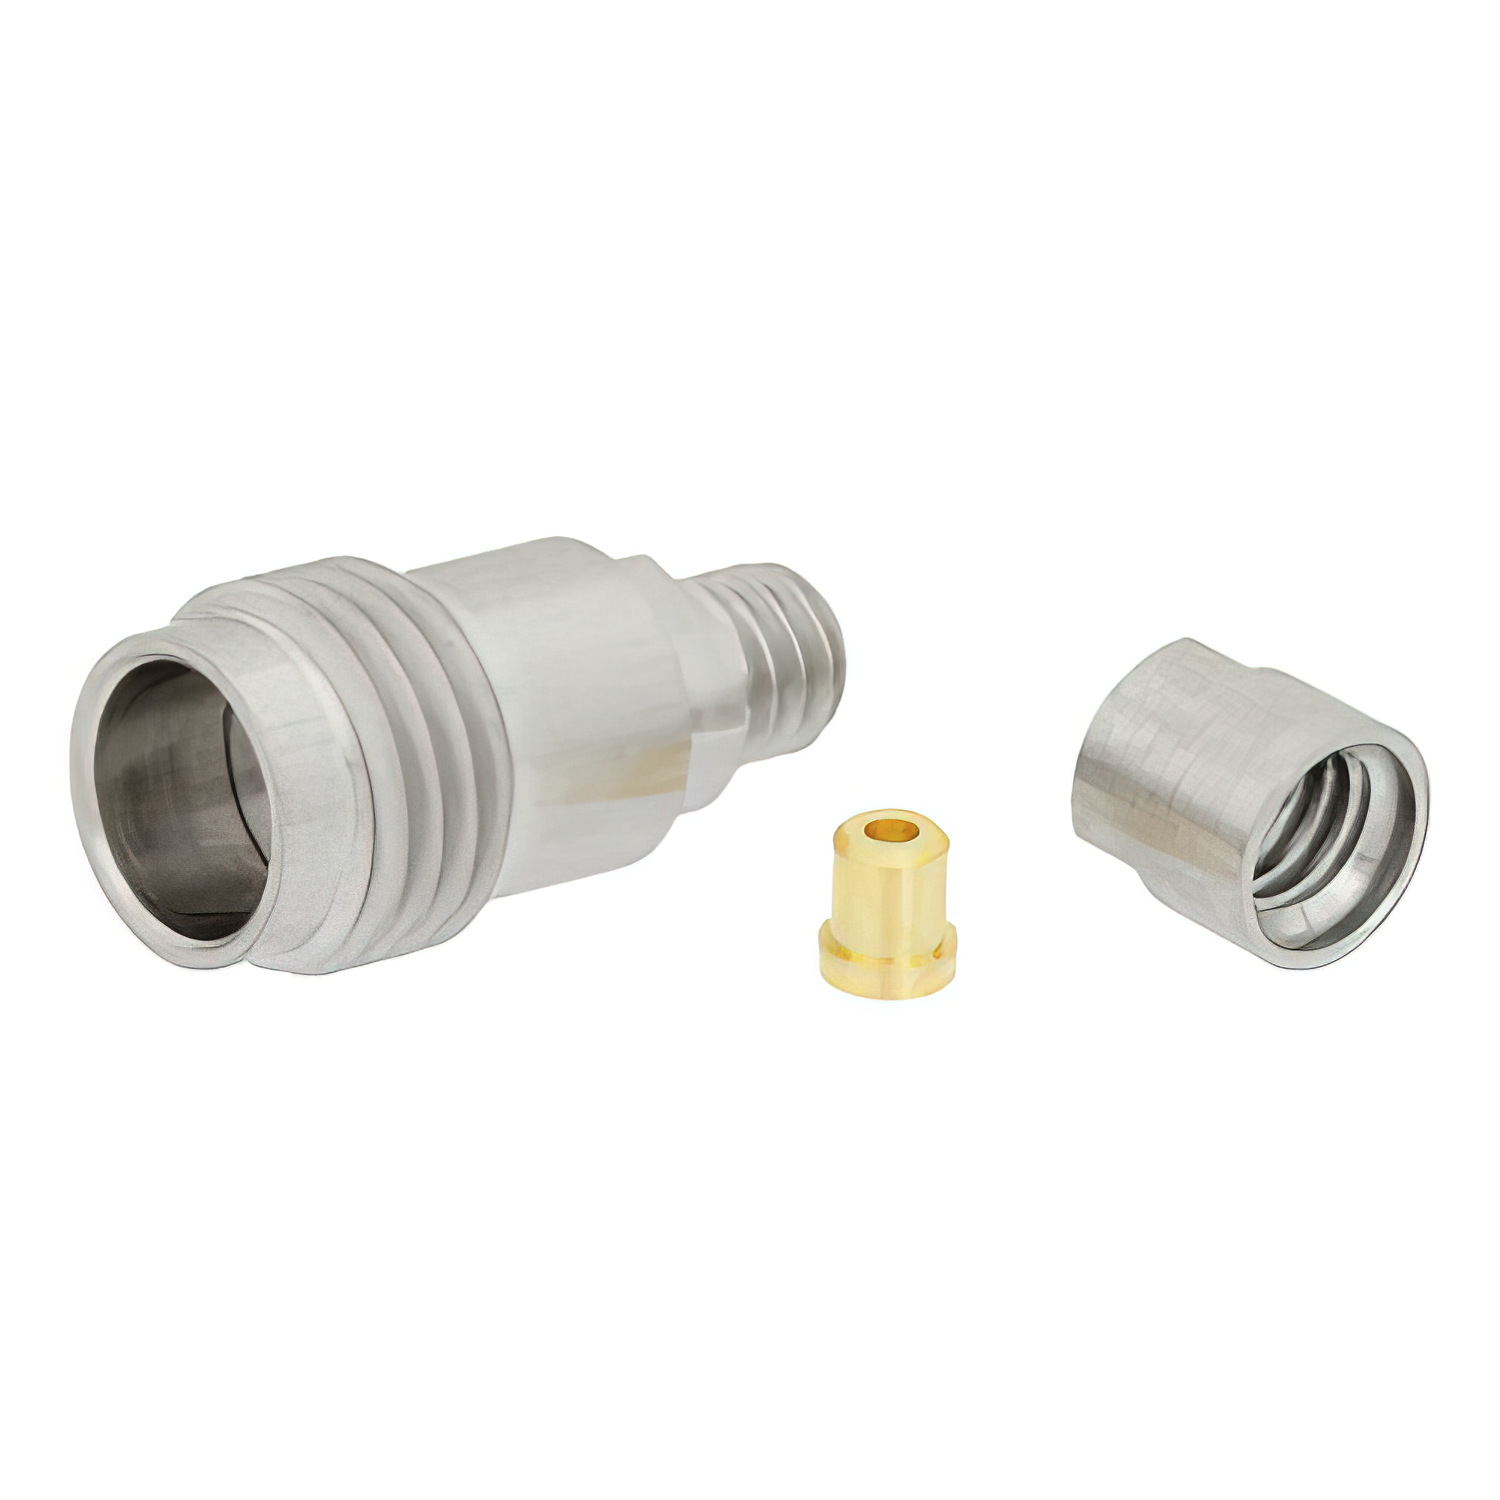 1.85mm Female Field Replaceable Connector 4 Hole Flange Mount1